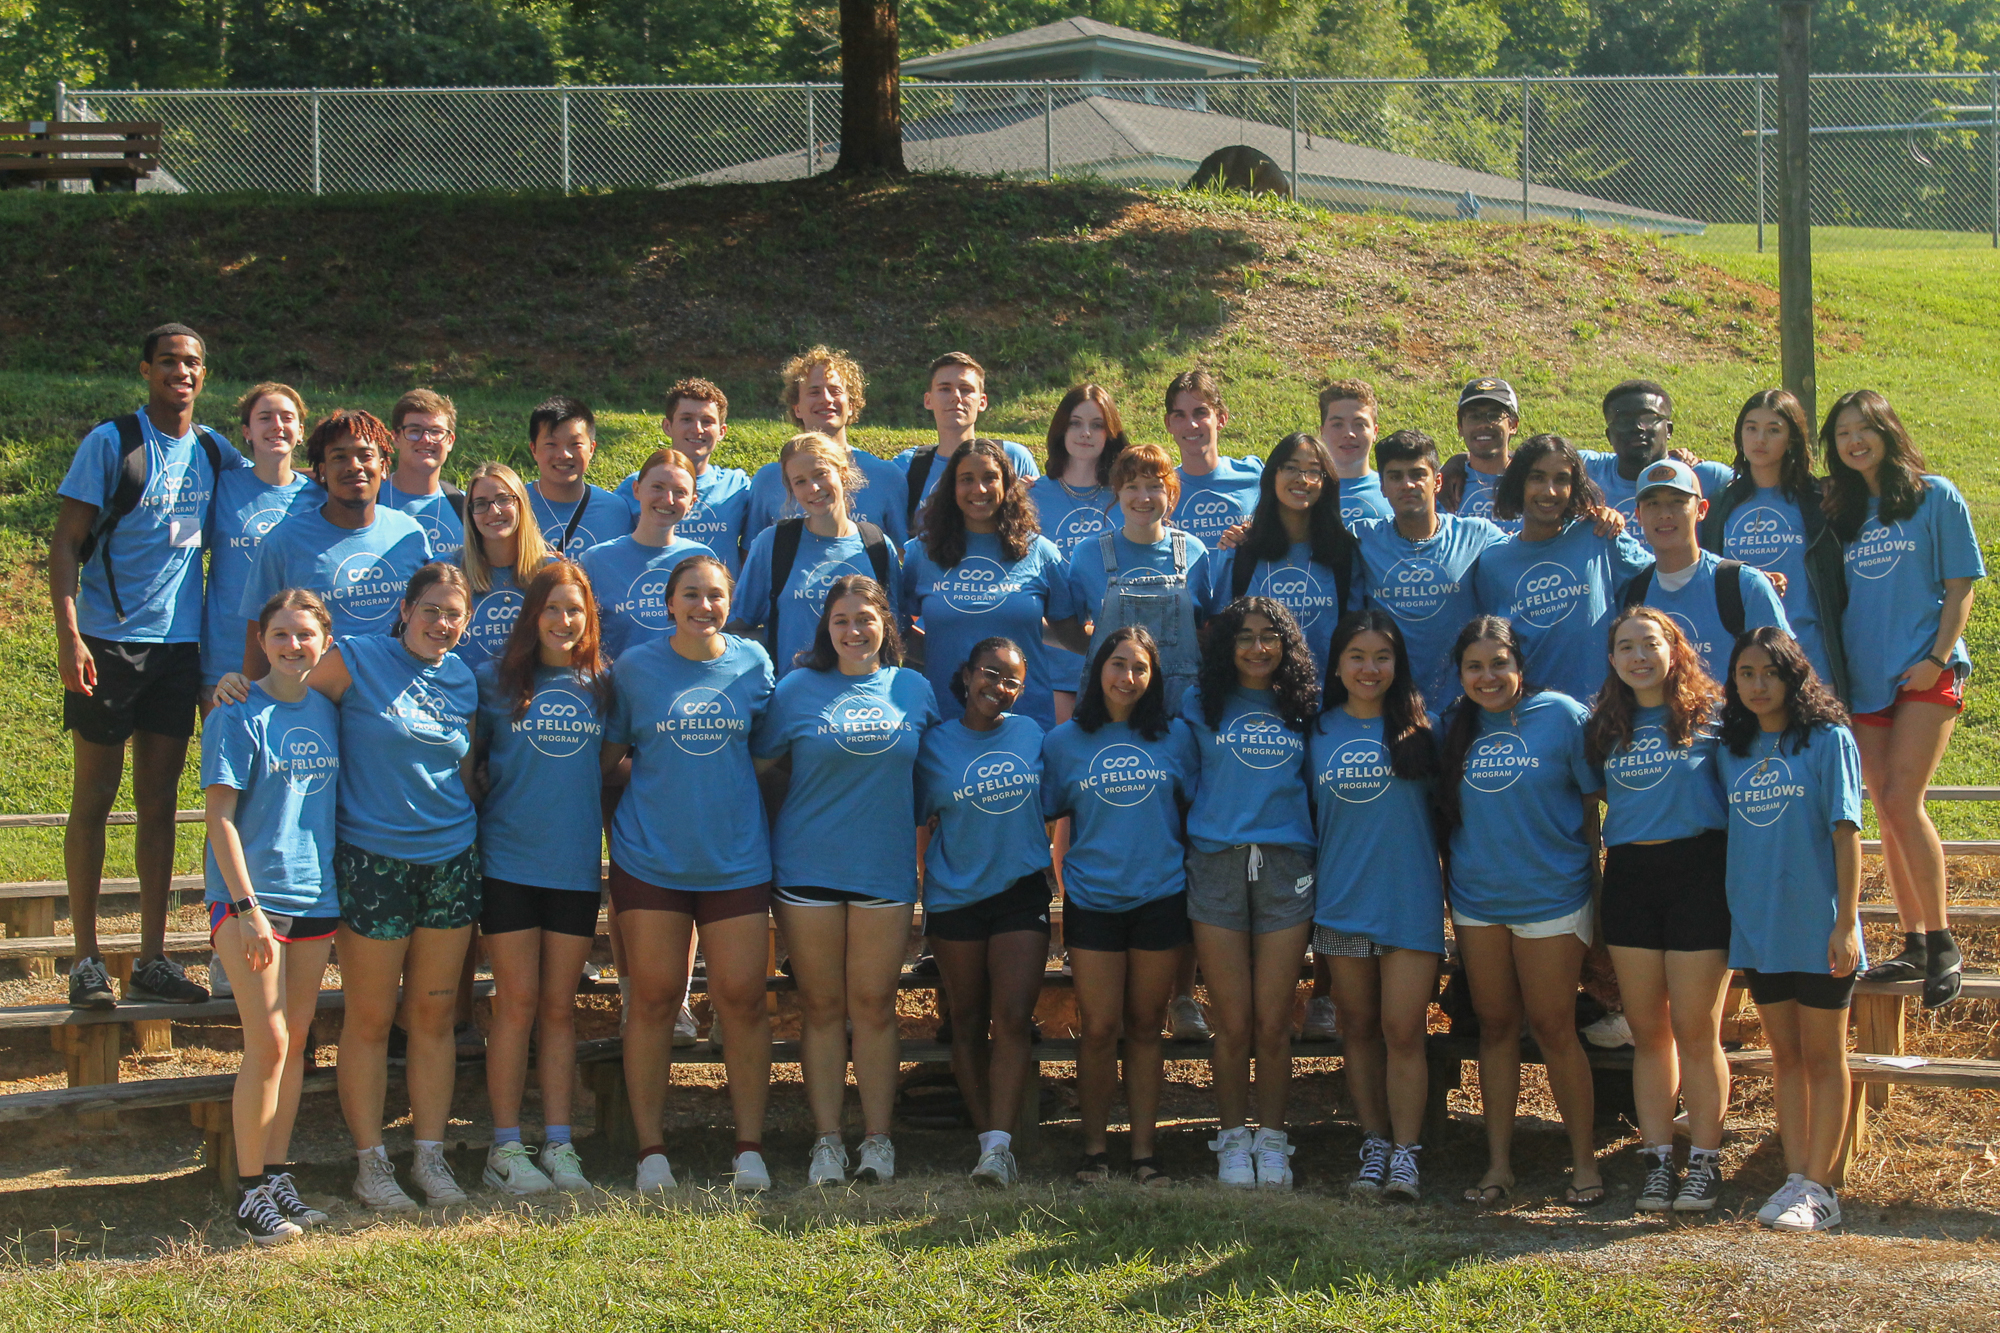 Group photo from the NC Fellows 2022 retreat, featuring members posing in their blue NC Fellows shirts.